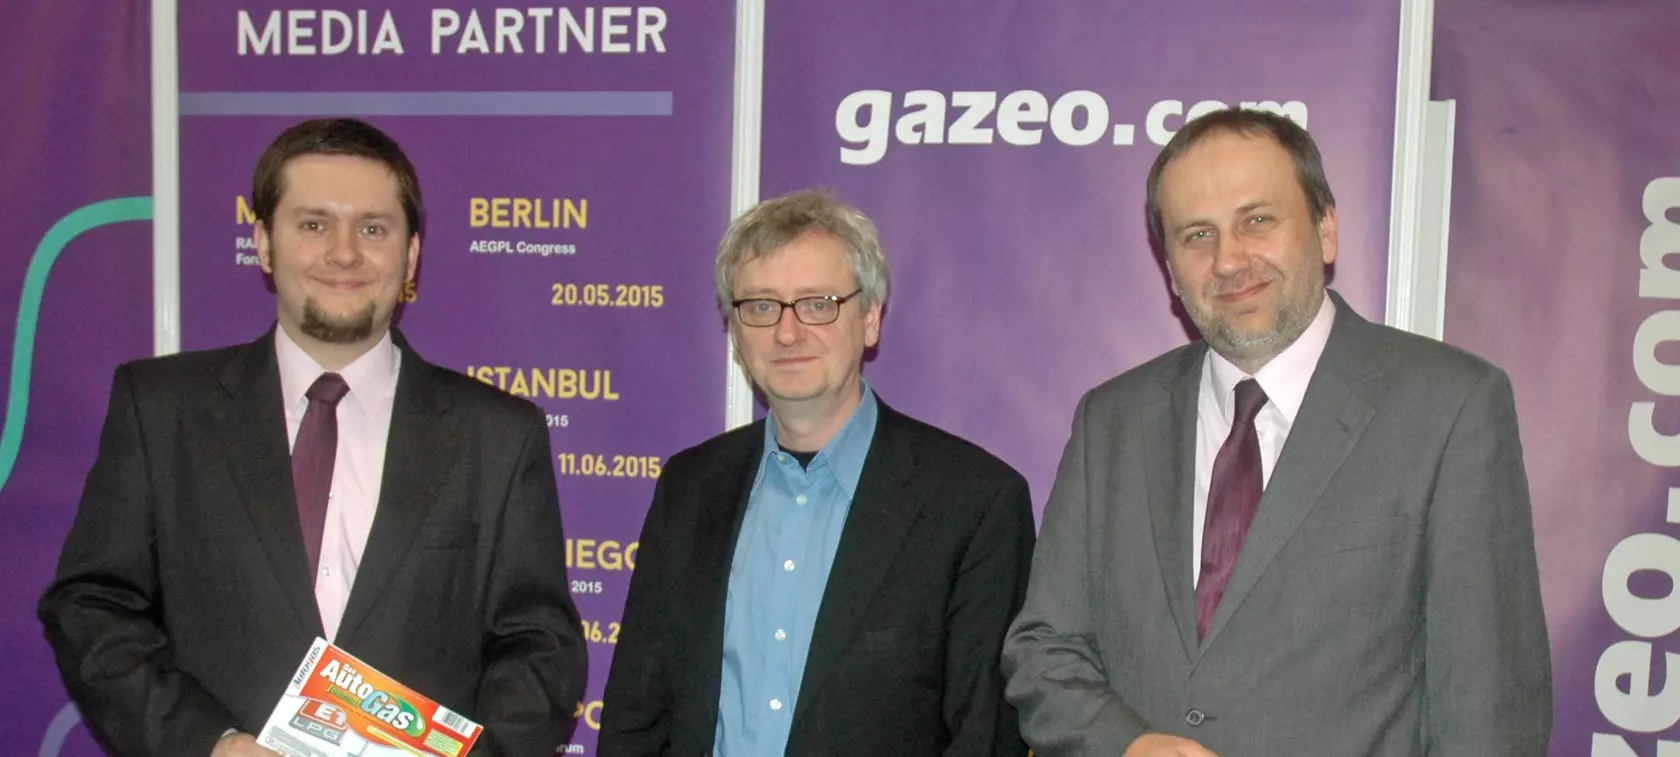 gazeo.com and AutoGas Journal set to cooperate